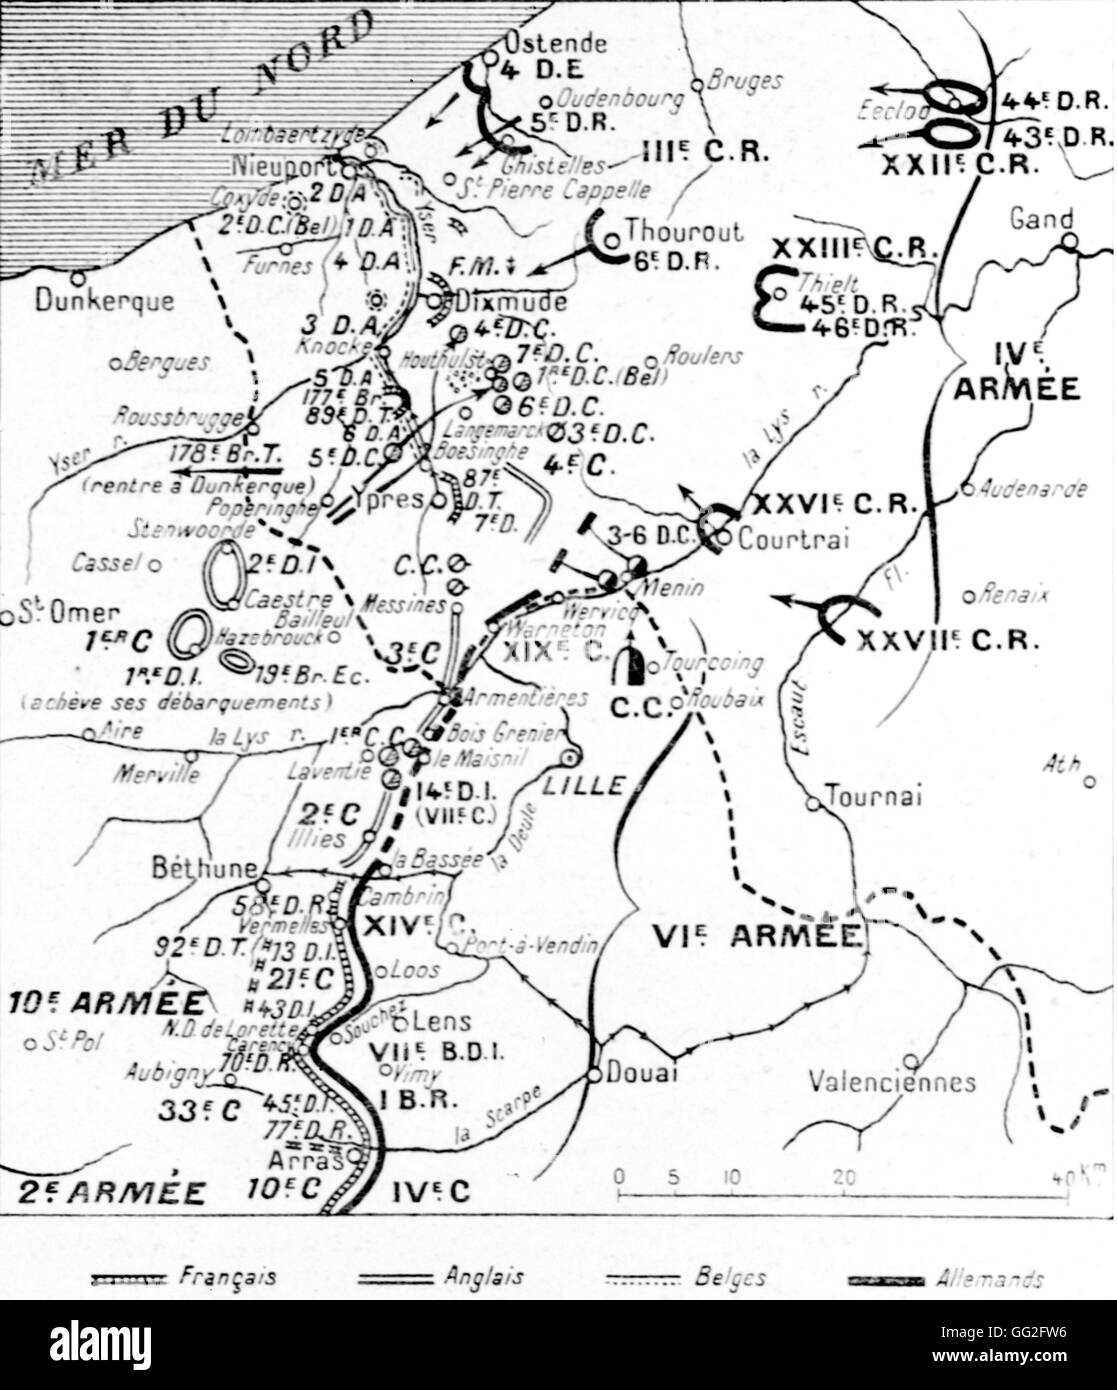 First World War.  Map of the locations of the army on 17th october 1914. End of the 'race to the sea' and the group formation of the Arlies in the North. (2nd Battalion: General de Castelnau; 10th Battalion: General de Maud'huy.) Stock Photo